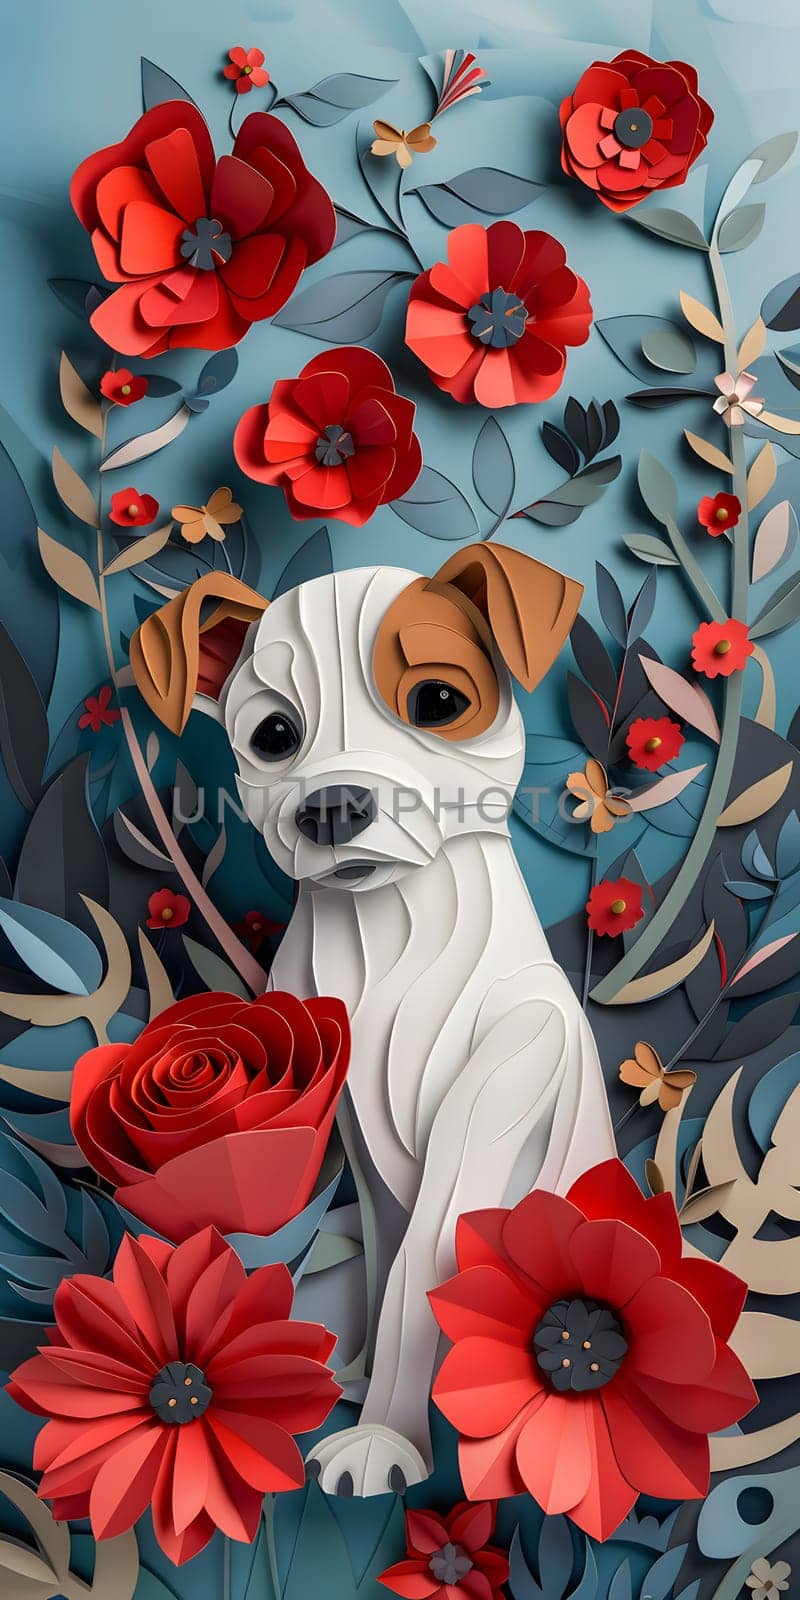 A Carnivore dog breed sits among red flowers in a picturesque painting by Nadtochiy